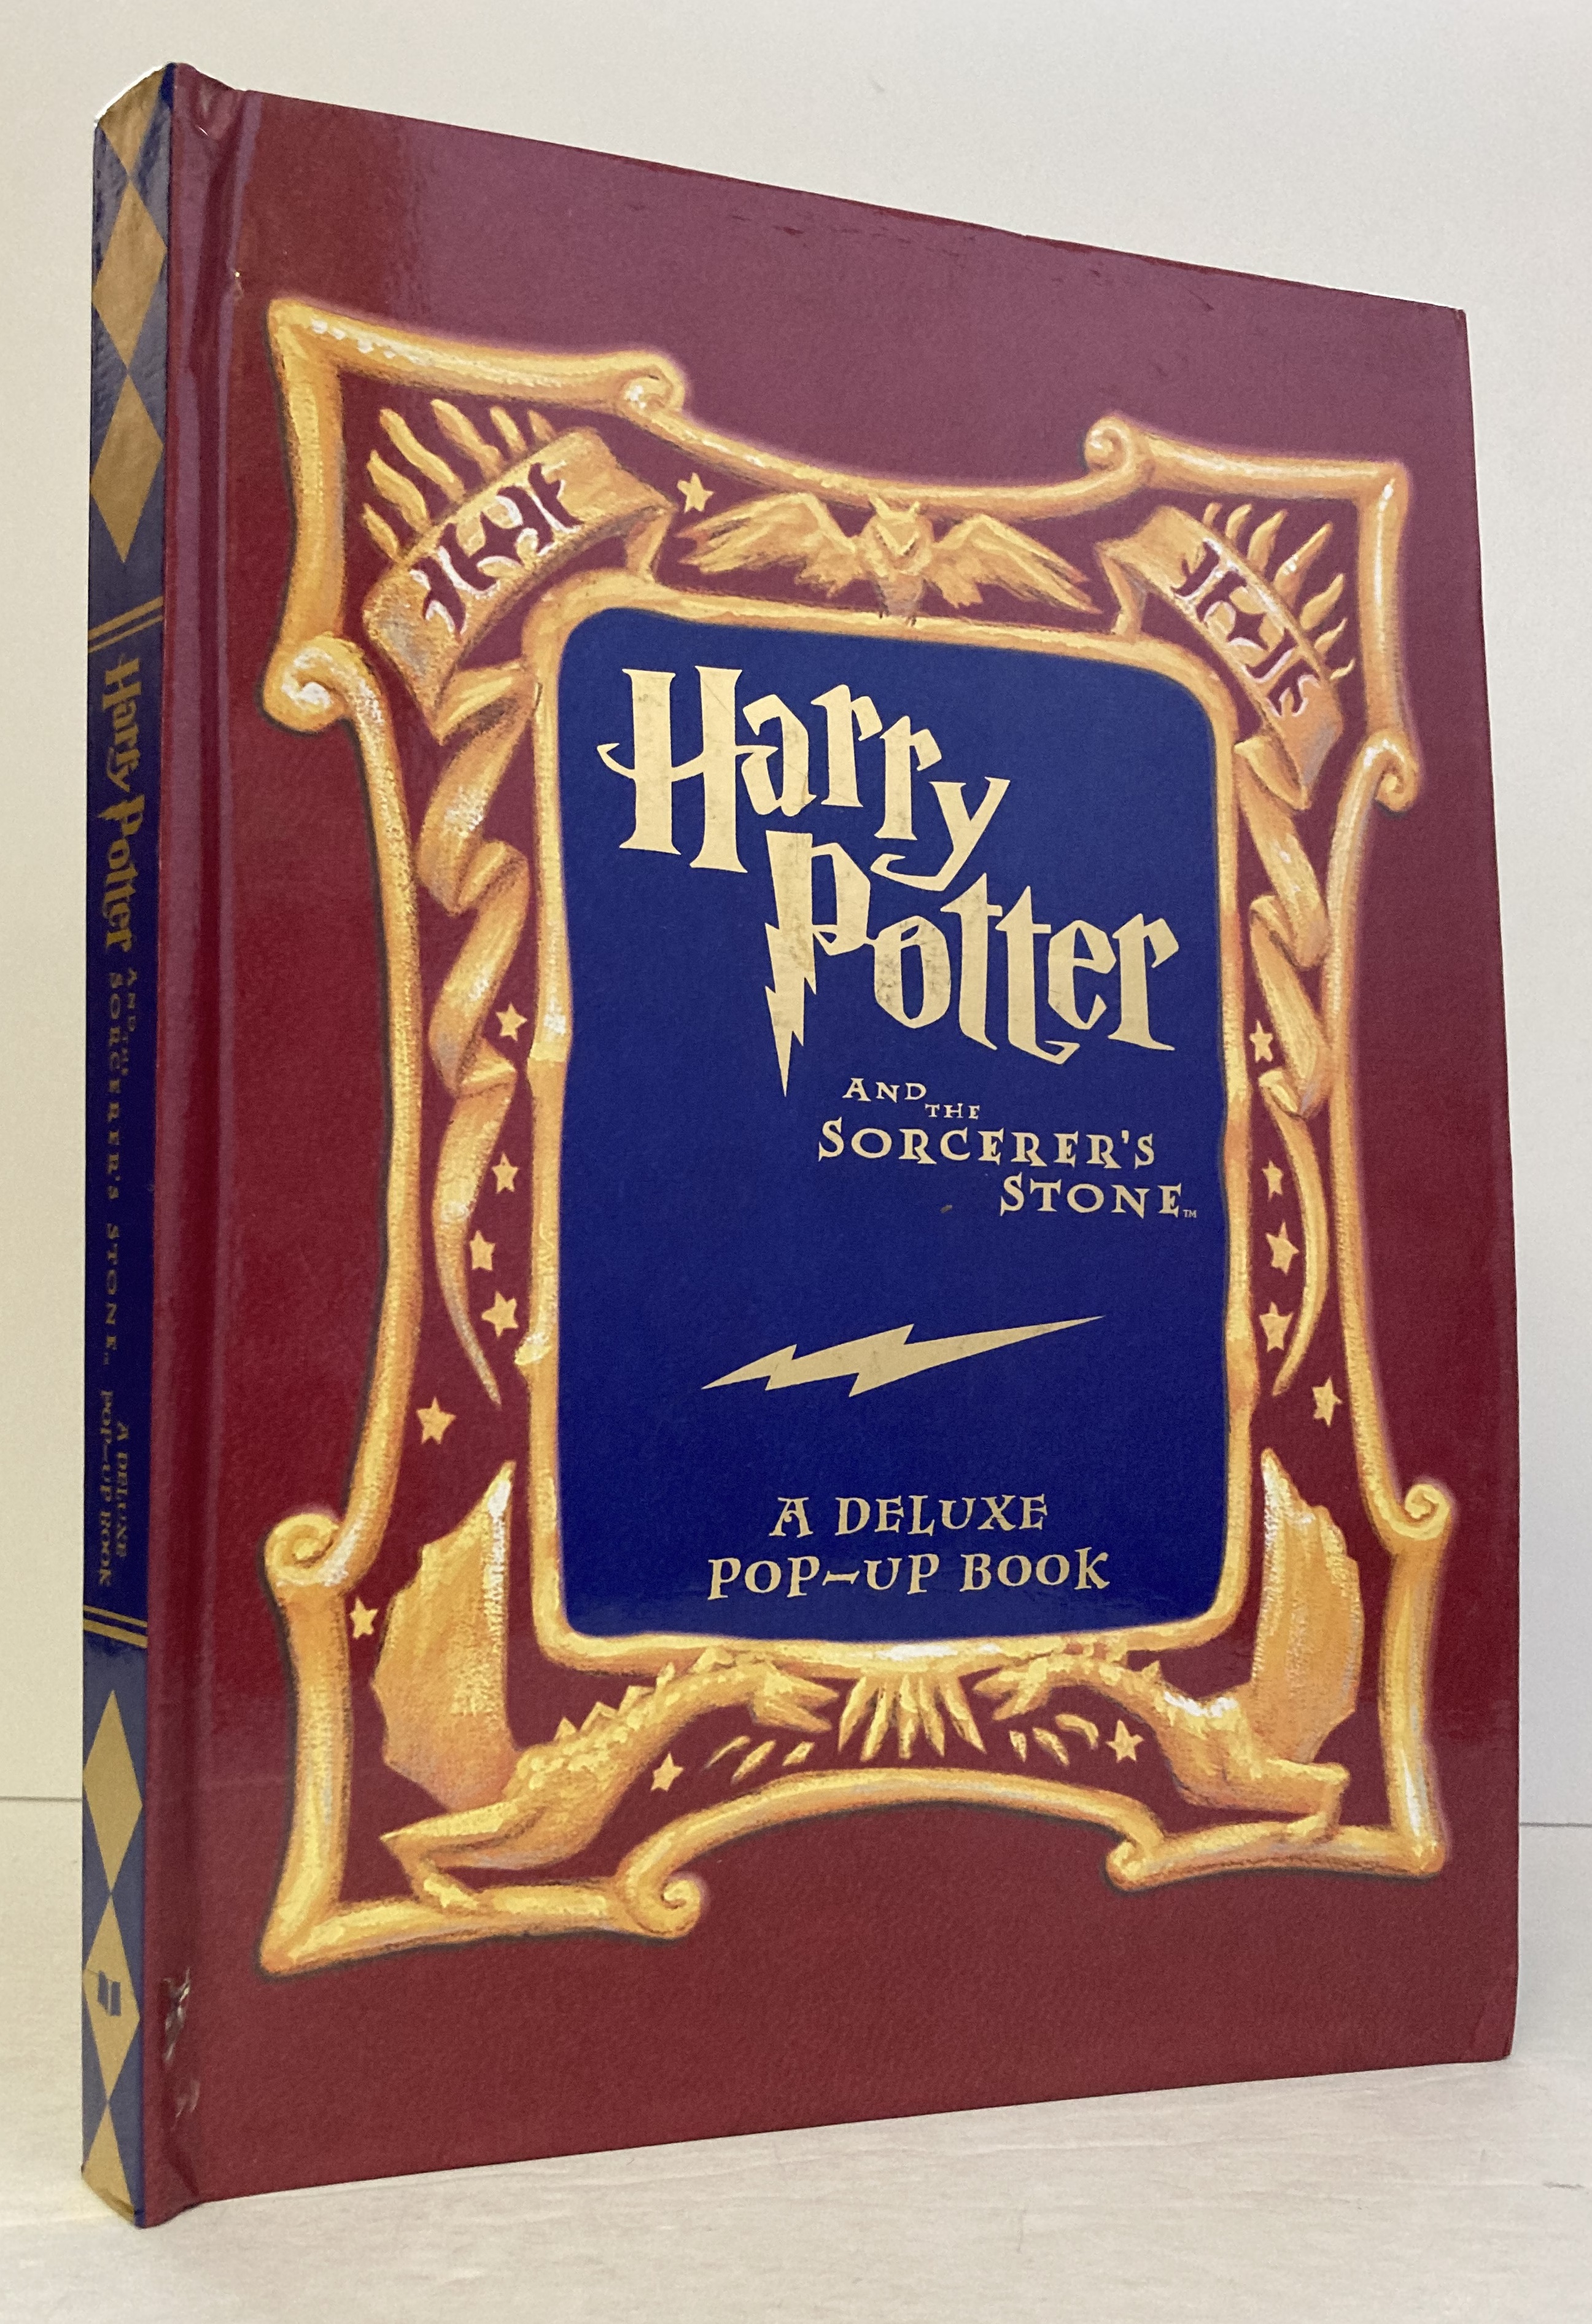 Harry Potter and the Sorcerer's Stone: A Deluxe Pop-up Book